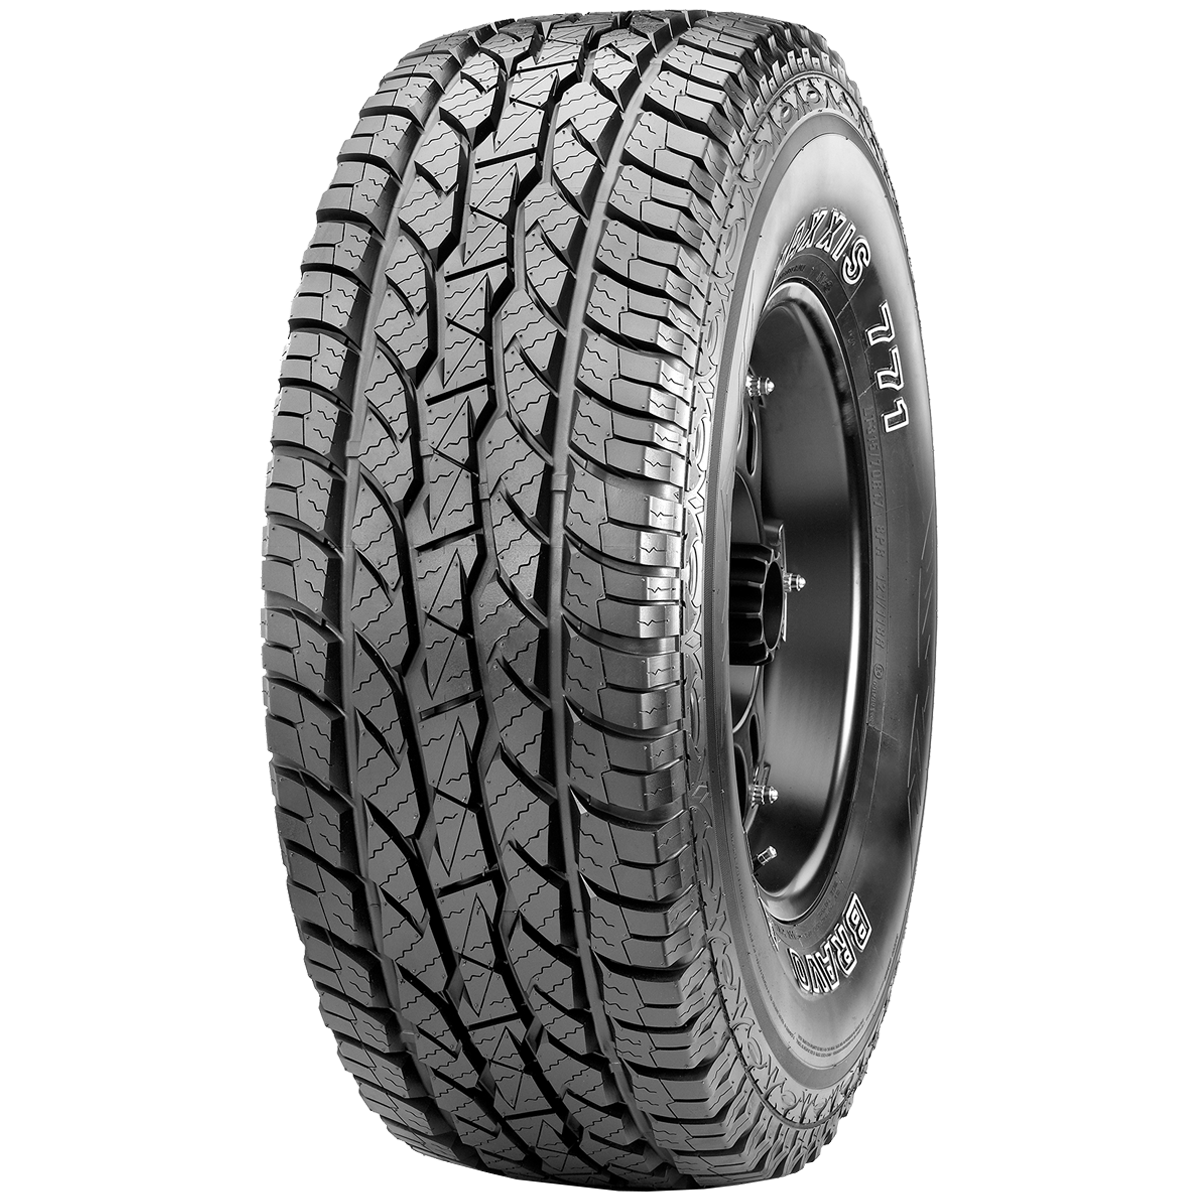 Maxxis Bravo AT-771 31x10.5R15 6Ply 109S